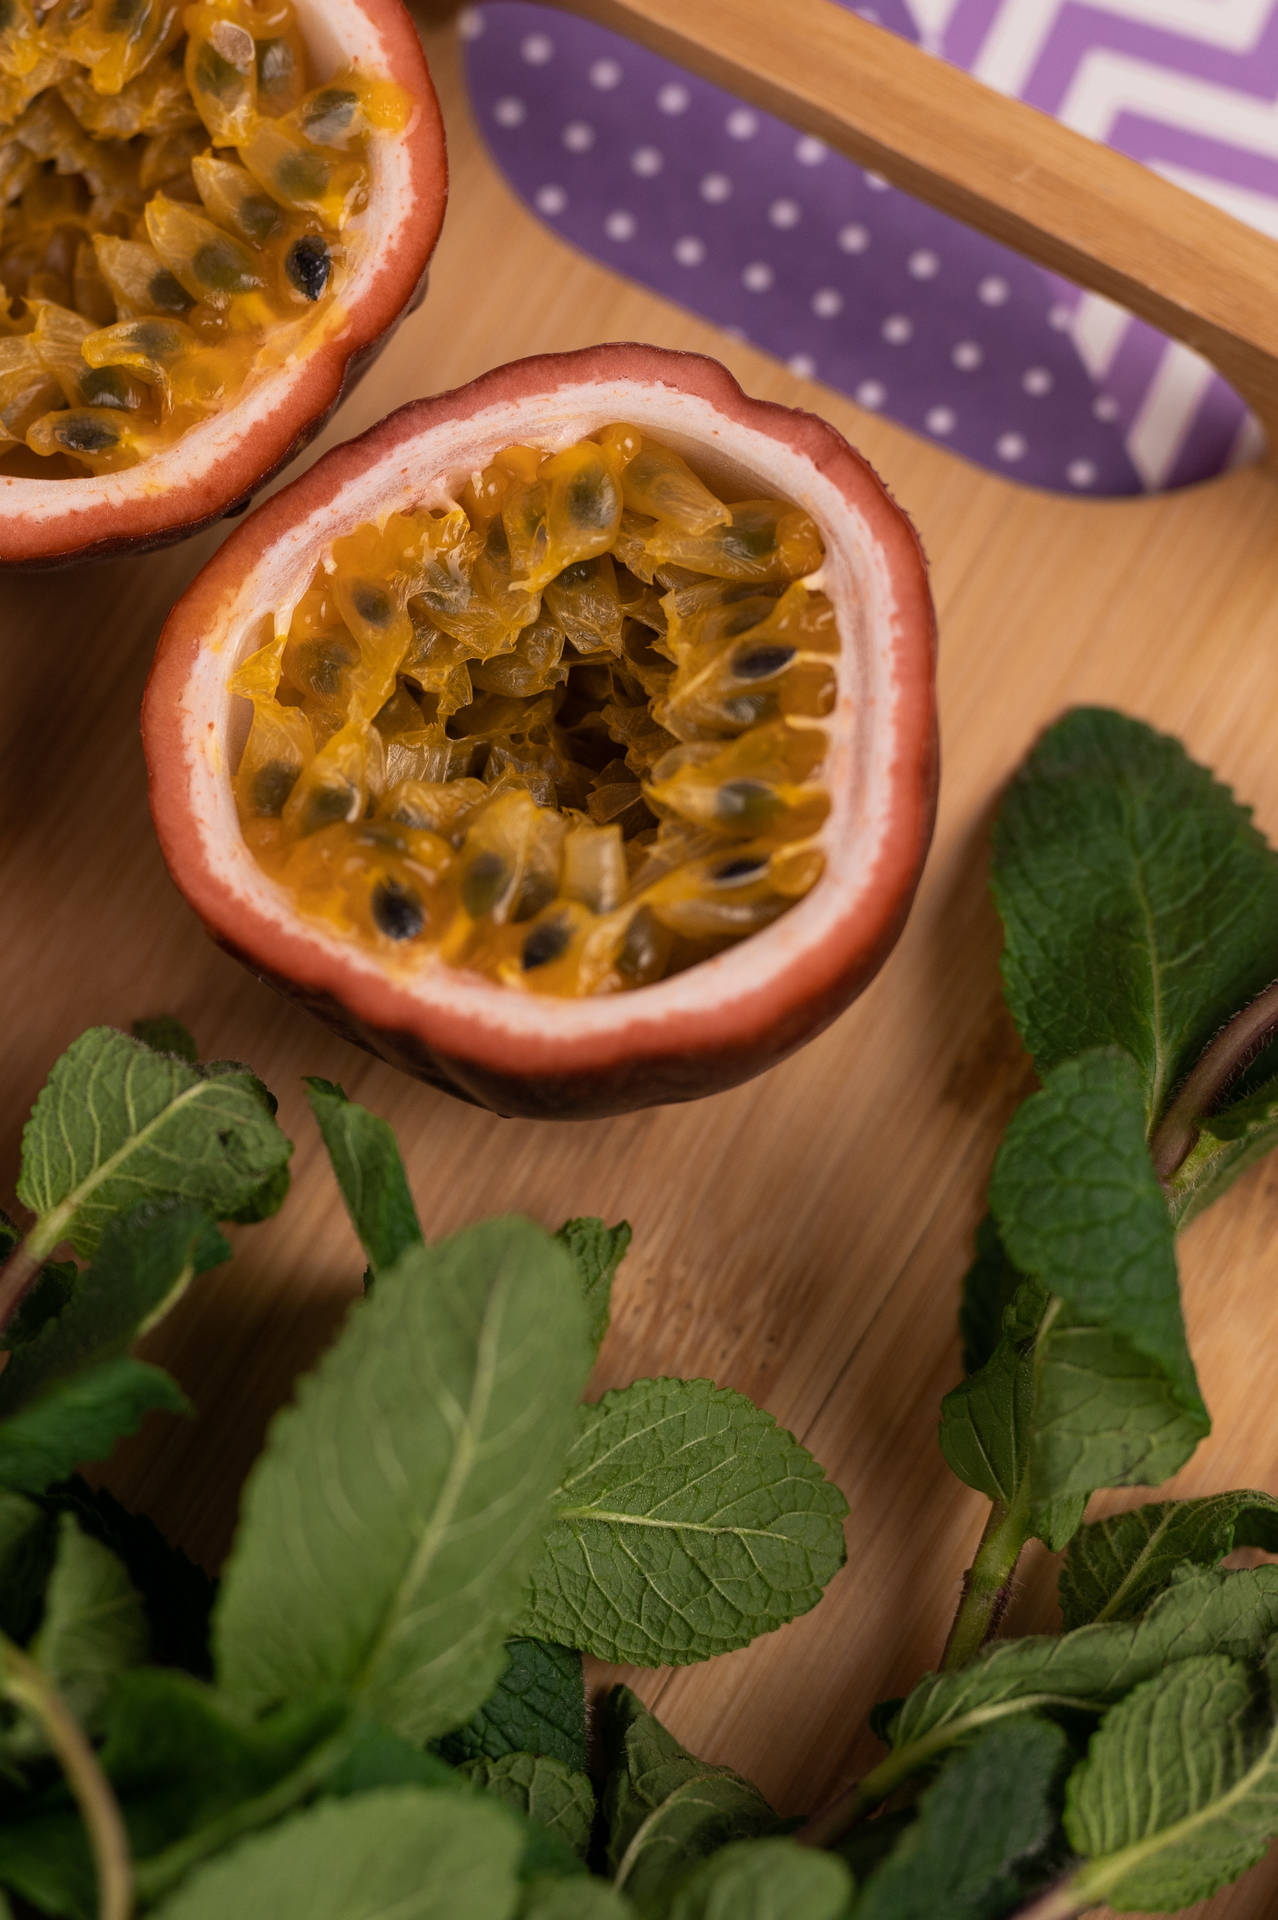 Fresh Cut Passion Fruit With Leaves Wallpaper